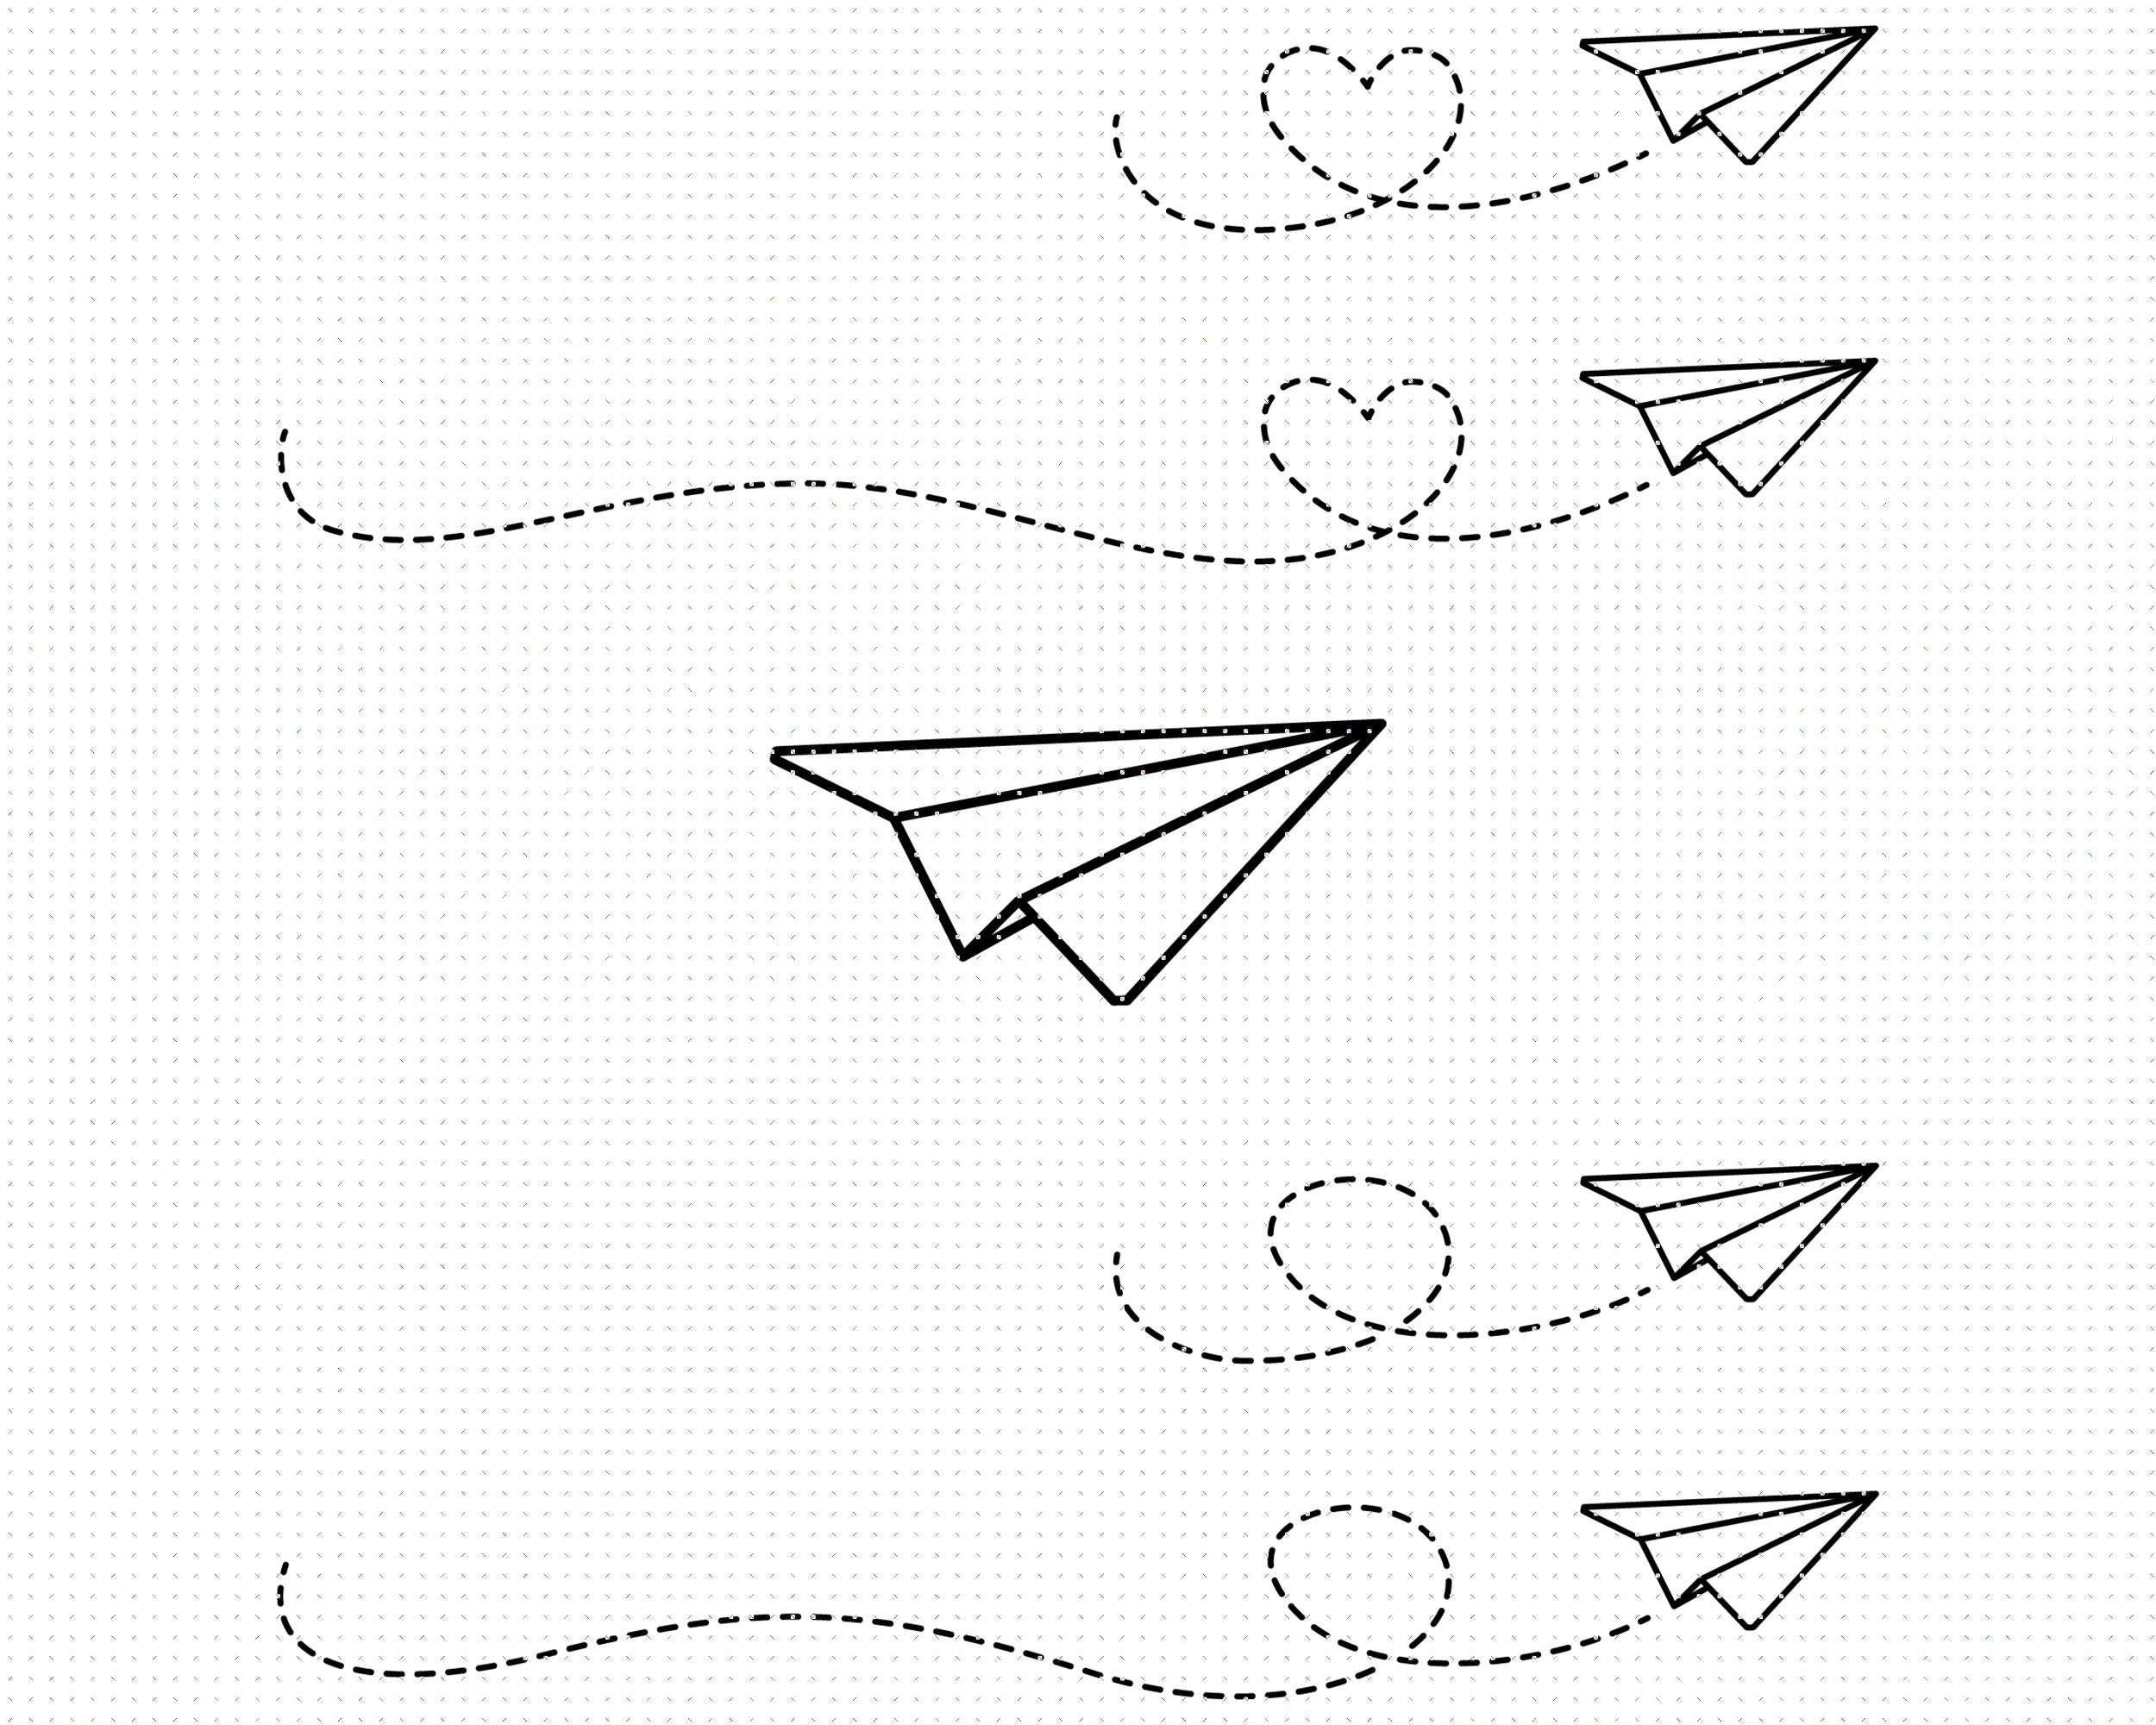 Paper Airplane Kit 3 45 New Cut and Fold Papers, Paper Plane